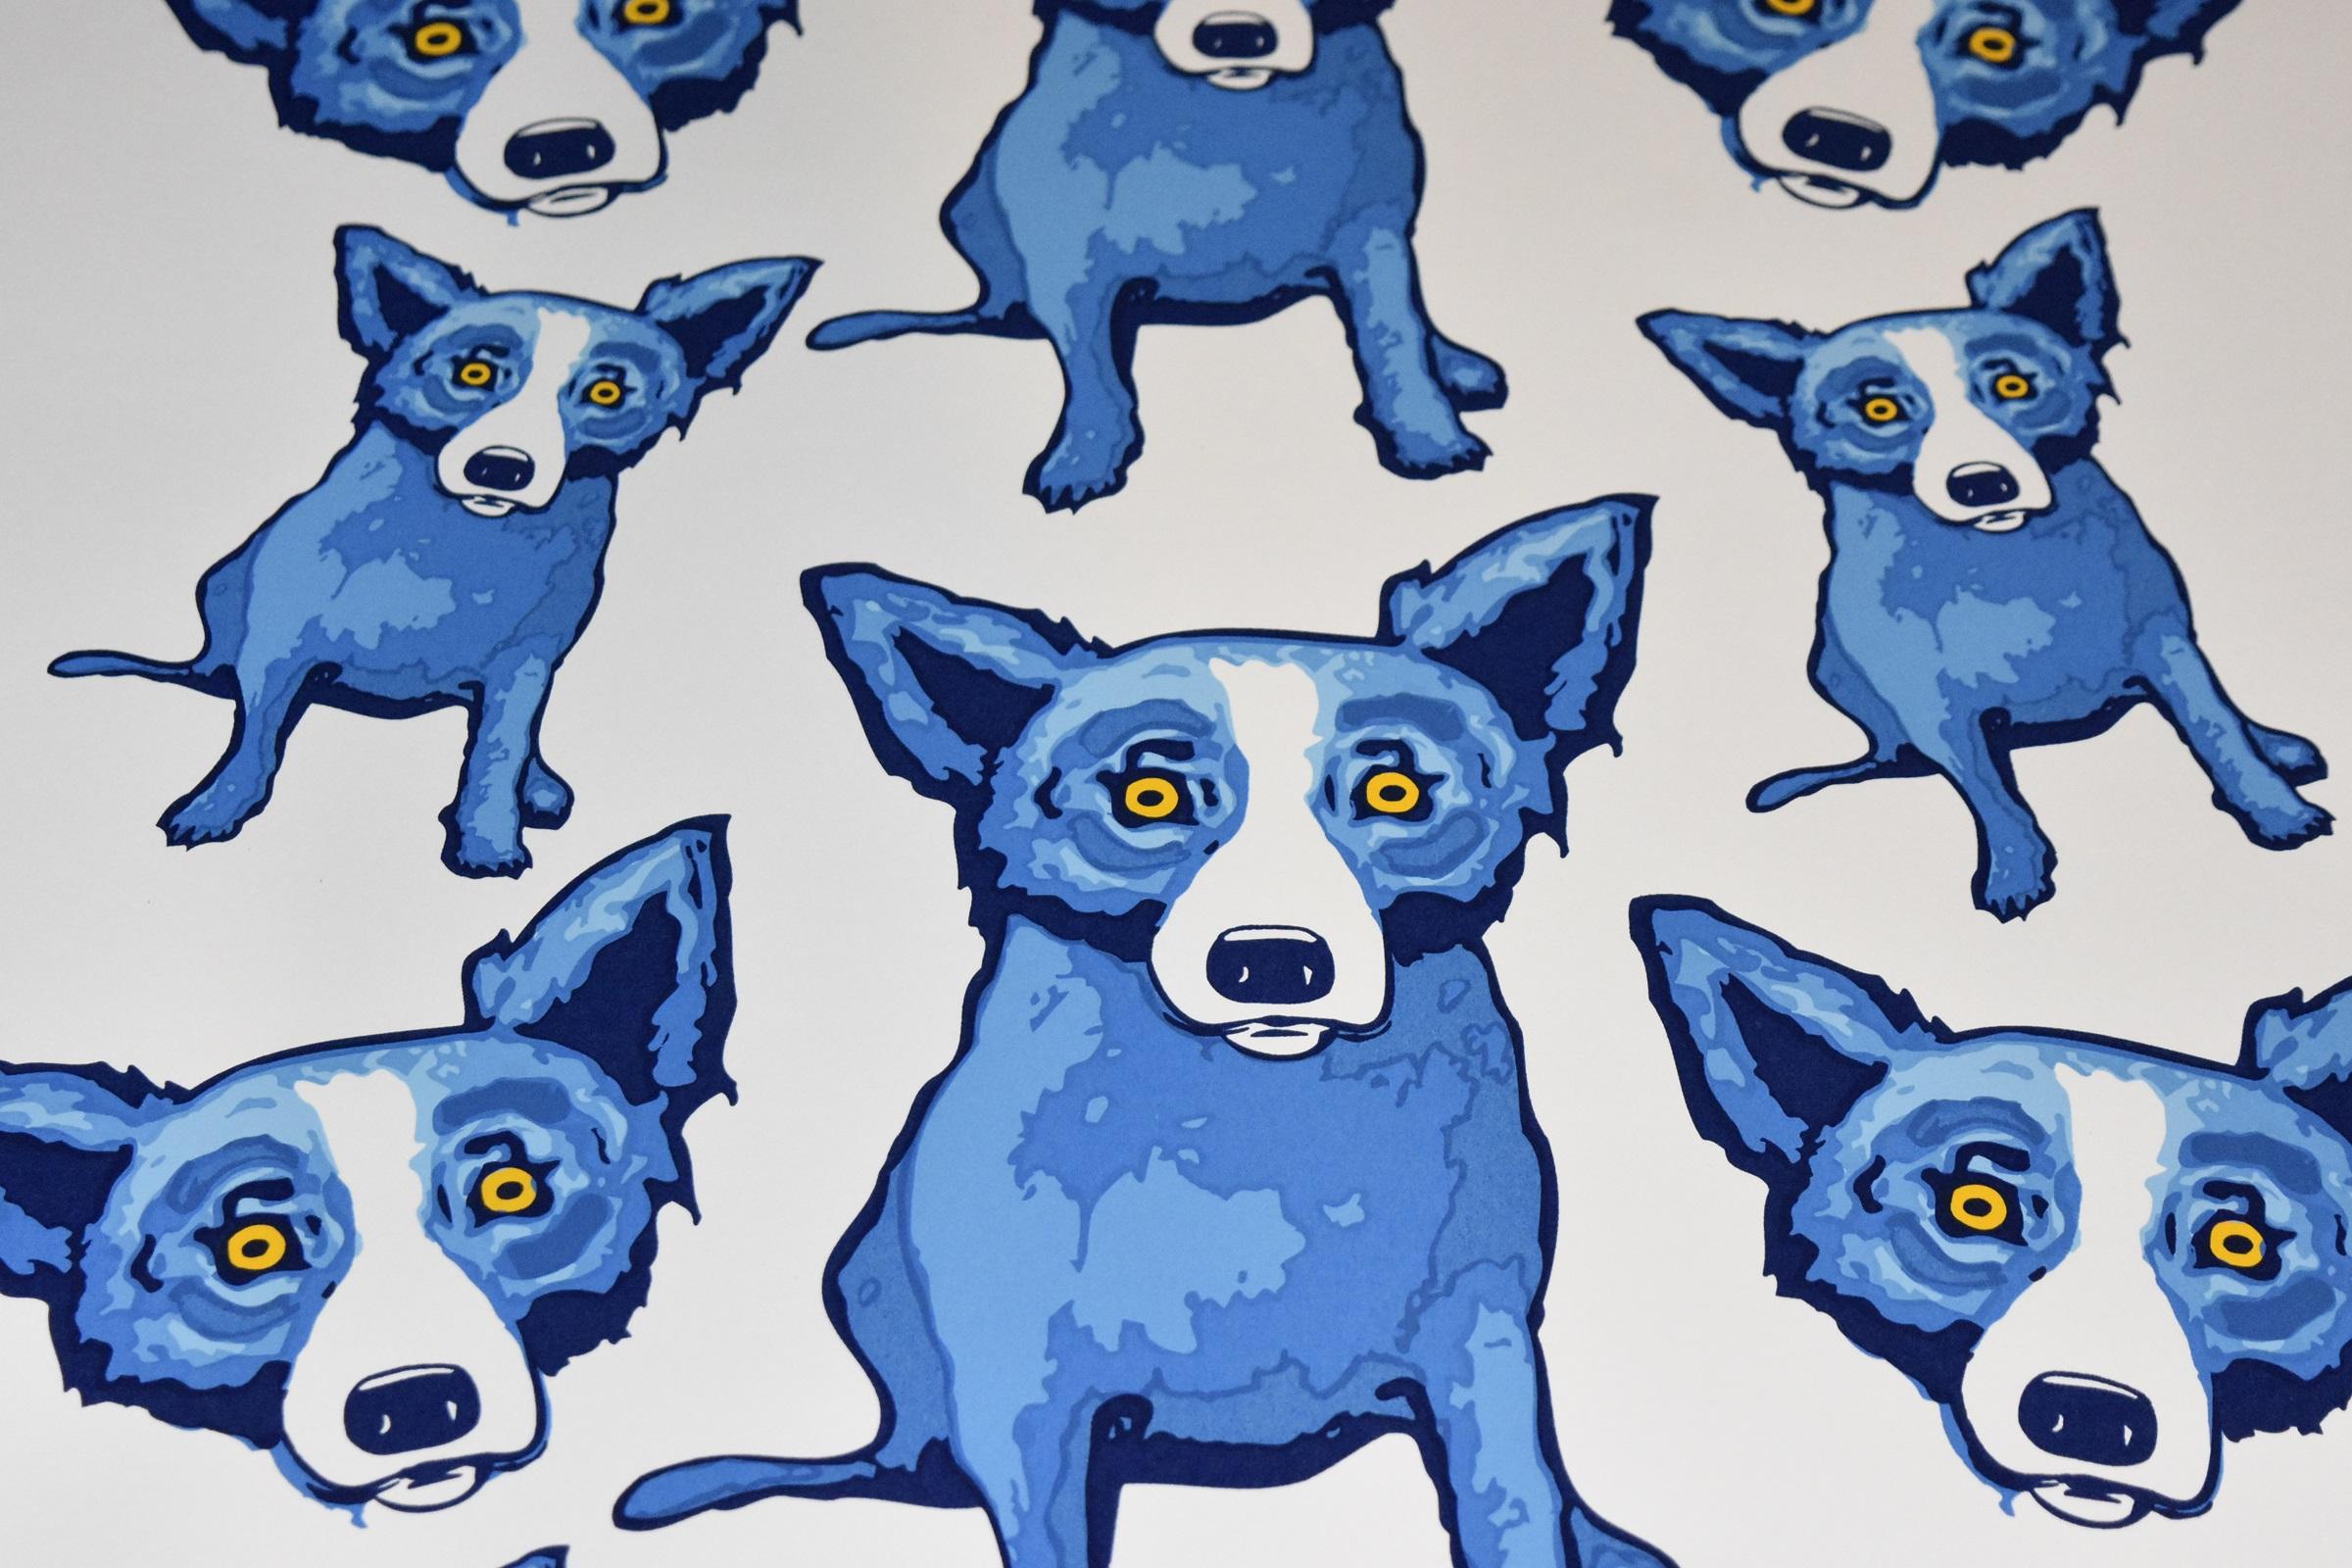 This Blue Dog work consists of a white background with 1 blue dog surround by varying degrees of blue dog heads and a single dog in the center.  